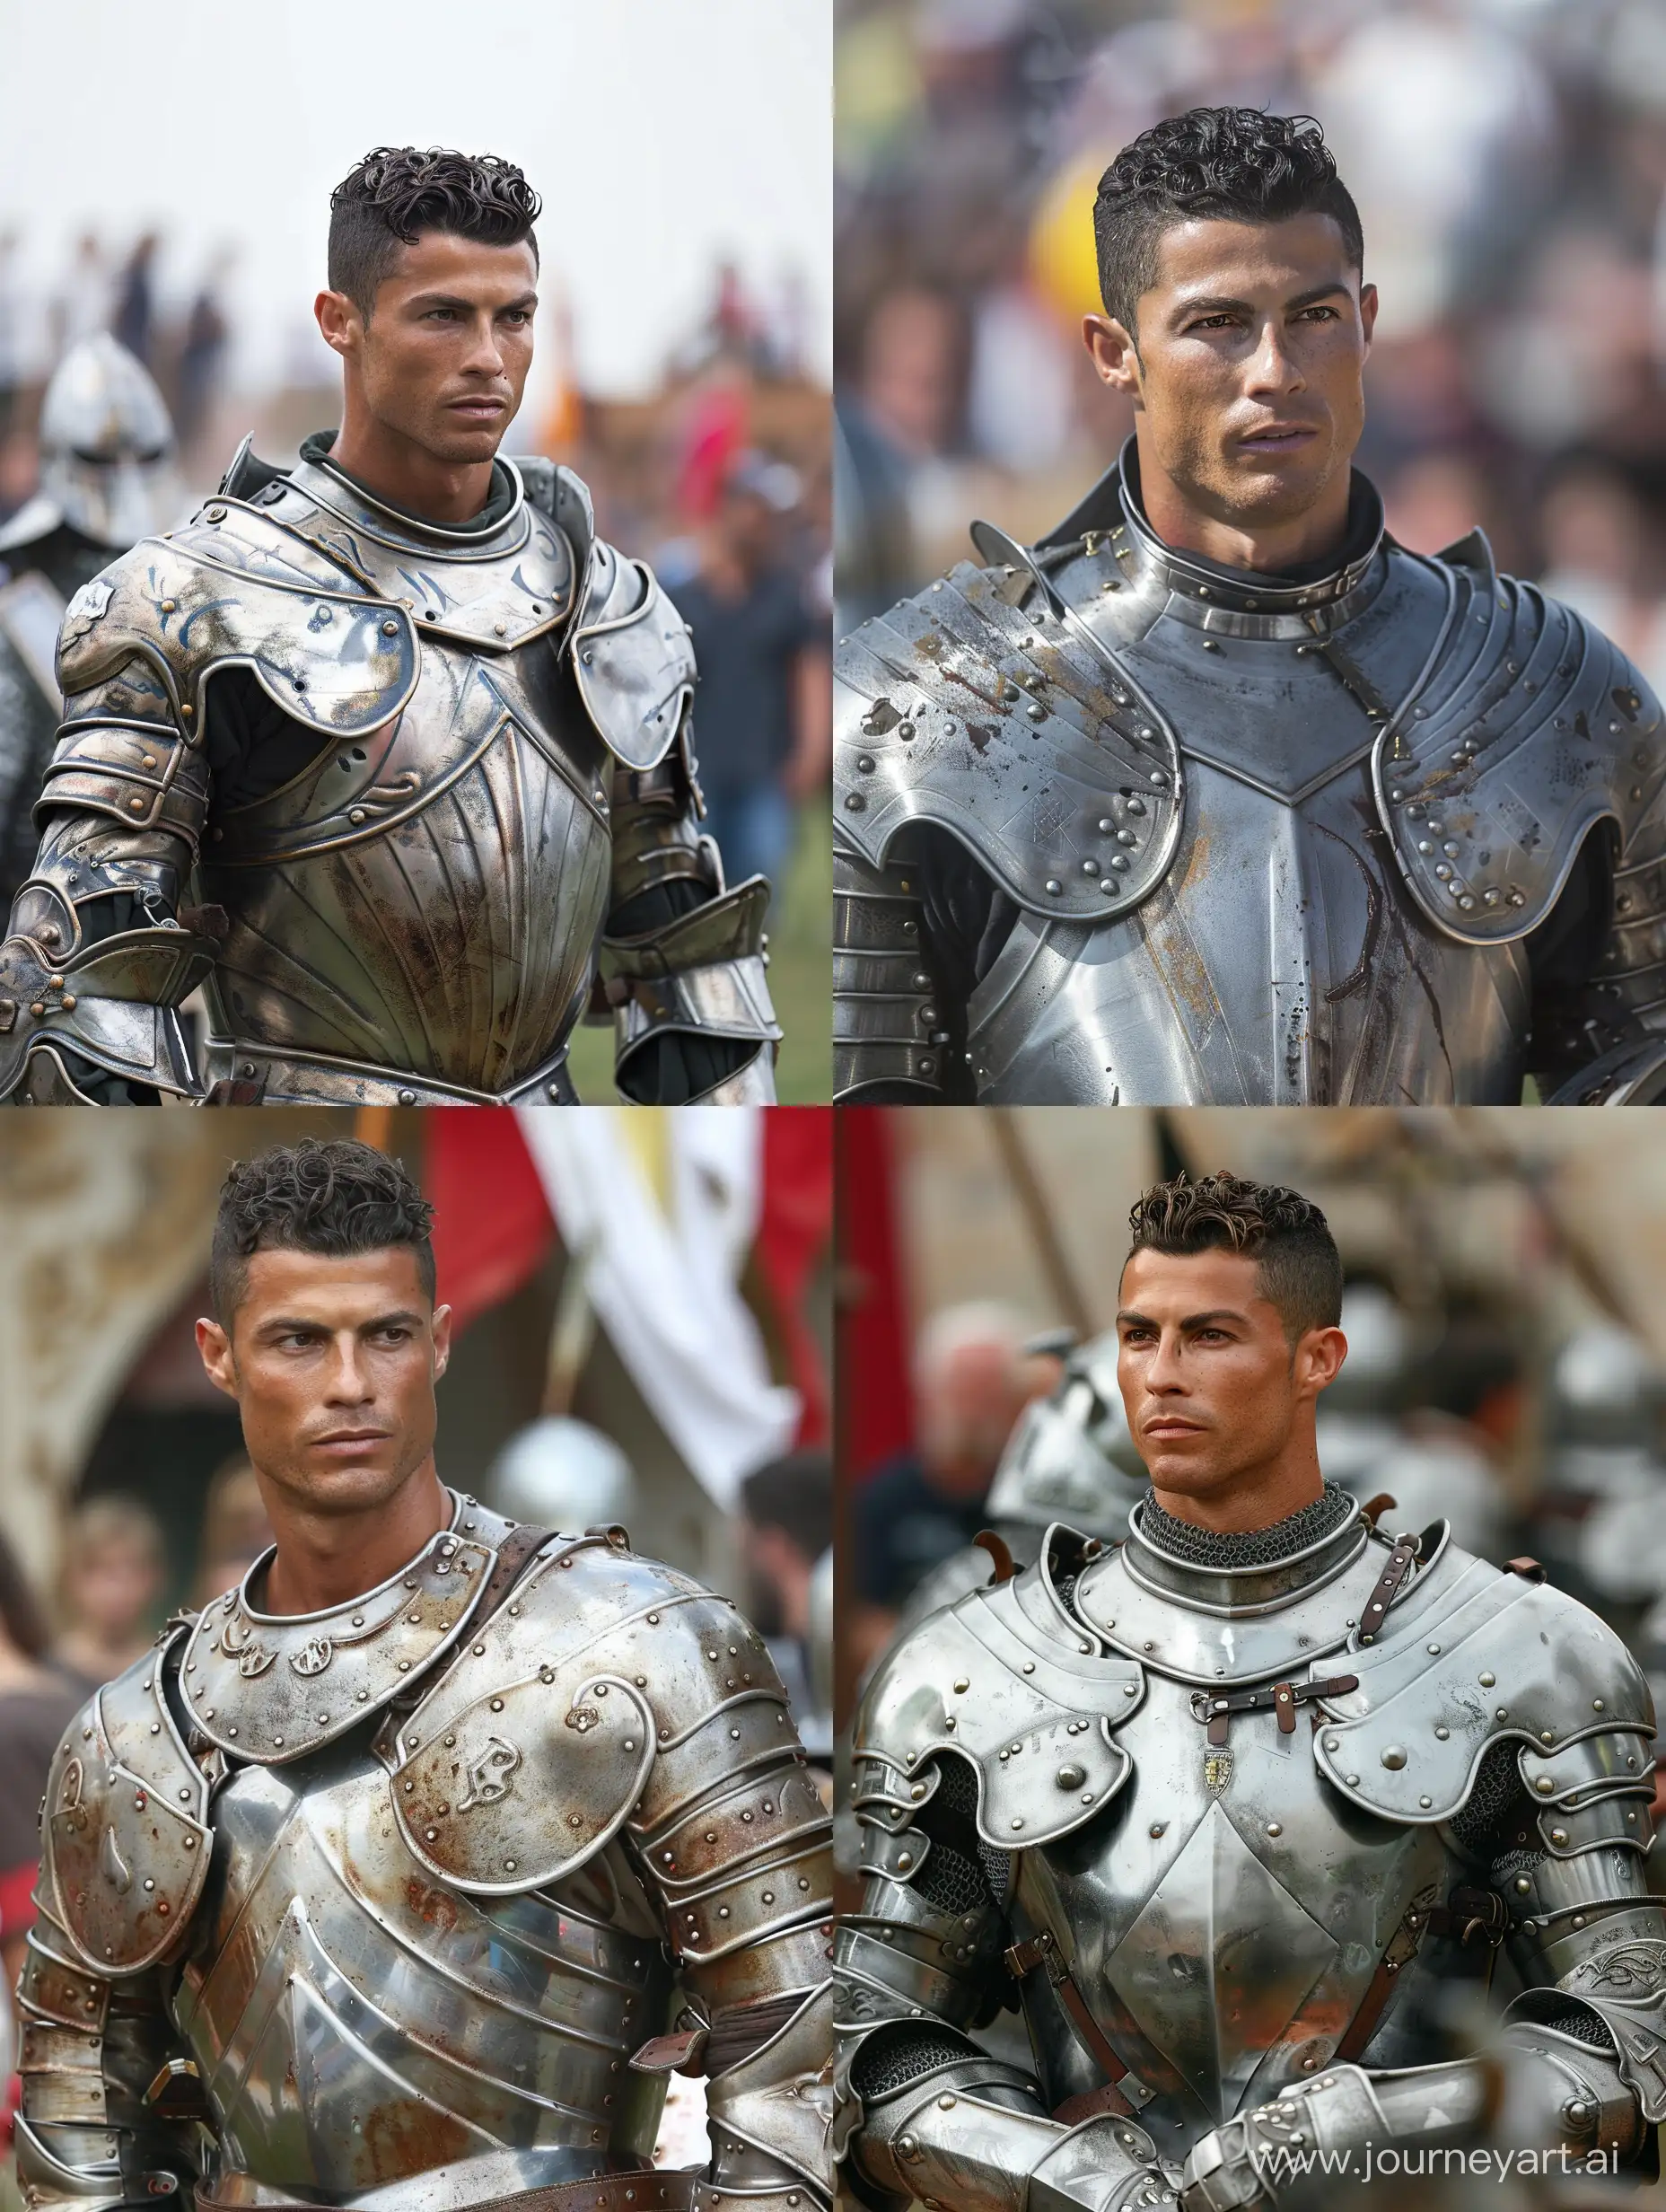 Cristiano Ronaldo participating in a medieval reenactment festival, dressed in full armor